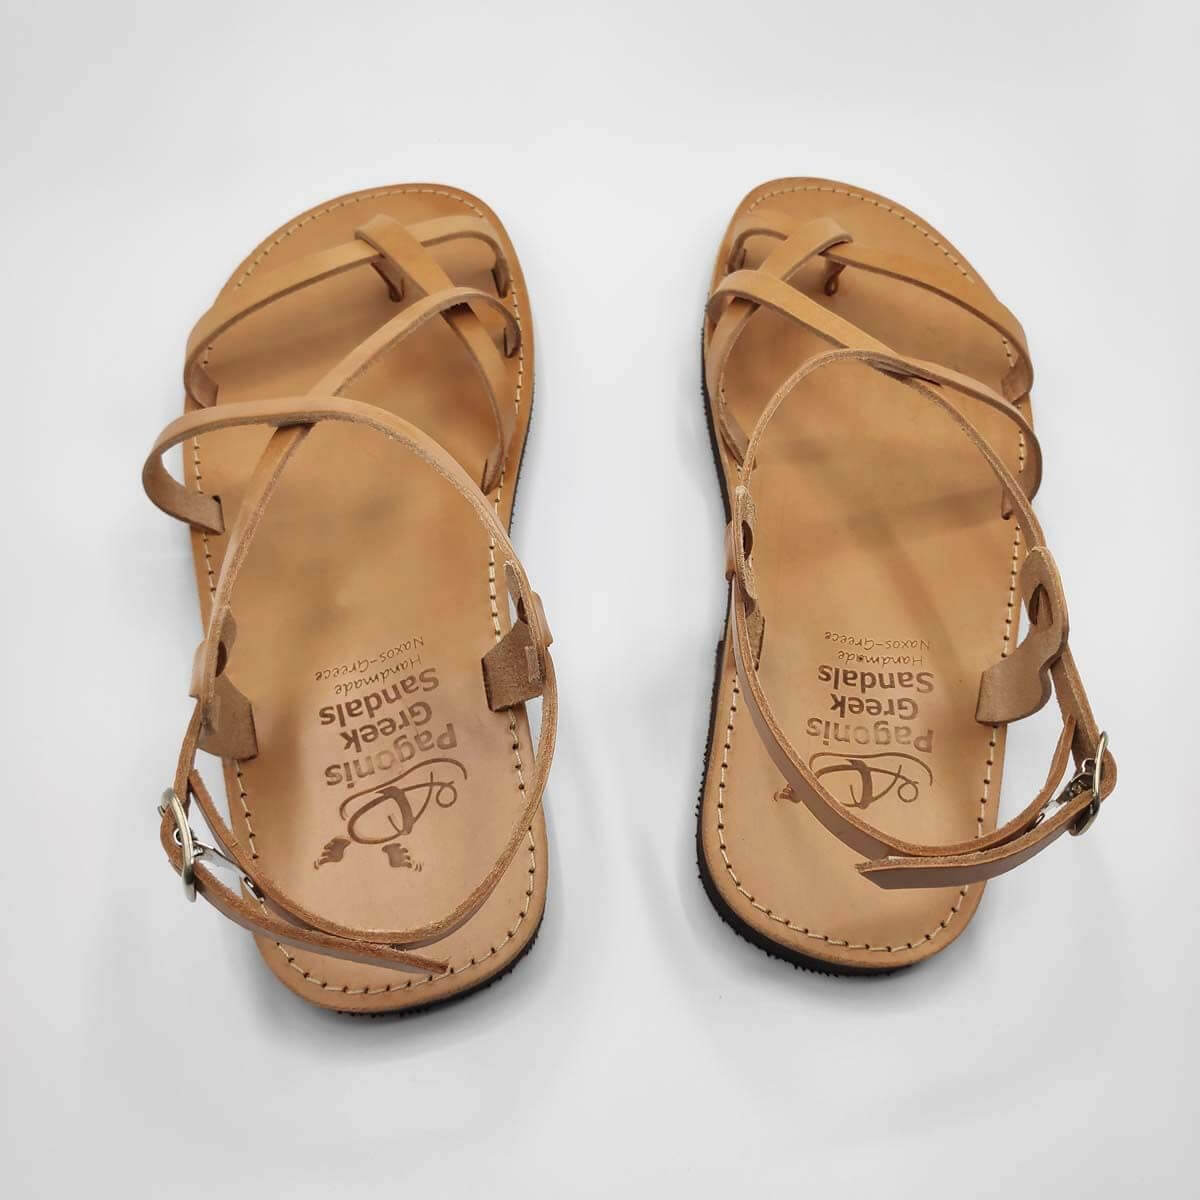 AMMOS Men leather sandals | Pagonis Greek Sandals